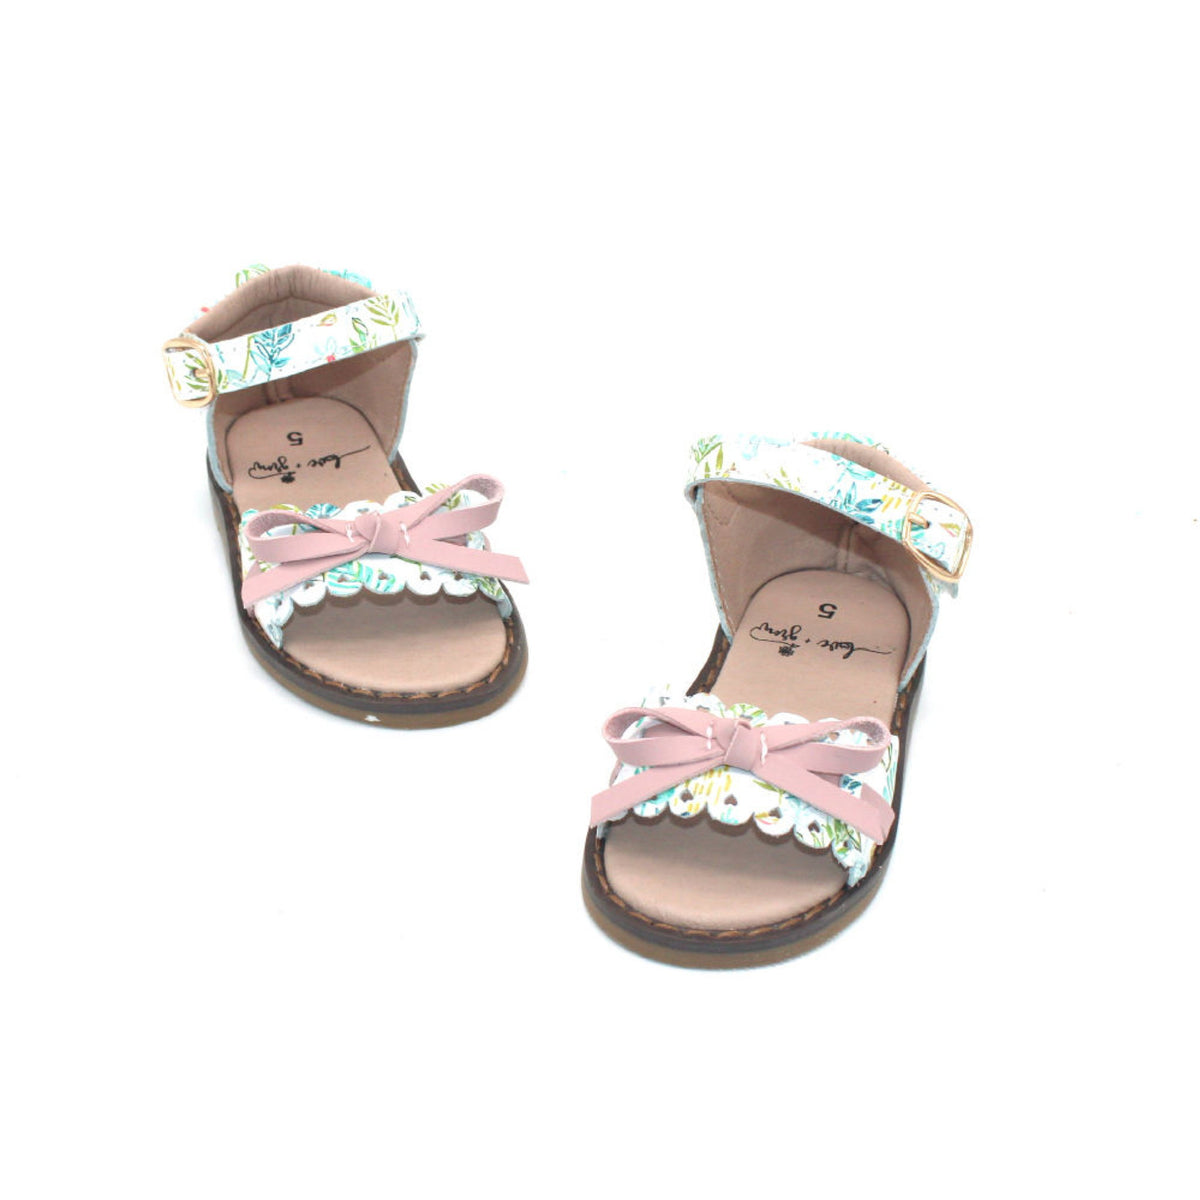 Bow Sandals- Tropical